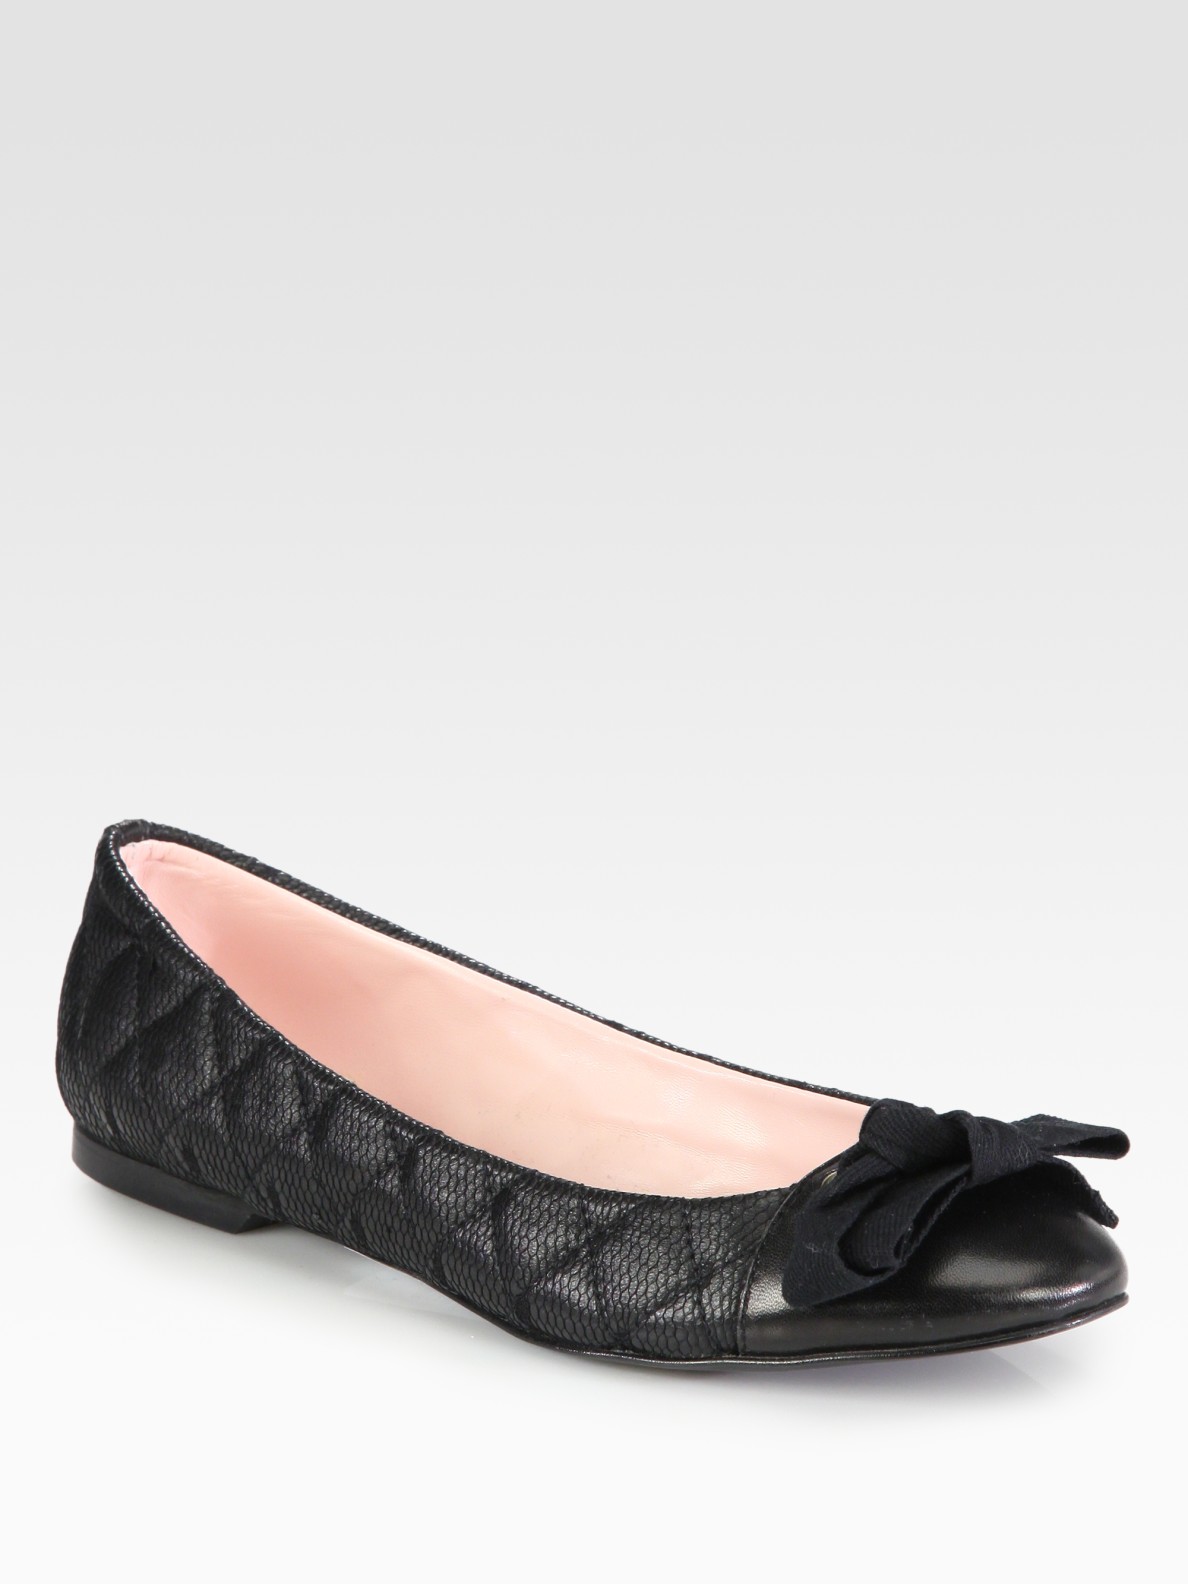 RED Valentino Leather and Lace Bow Ballet Flats in Black 